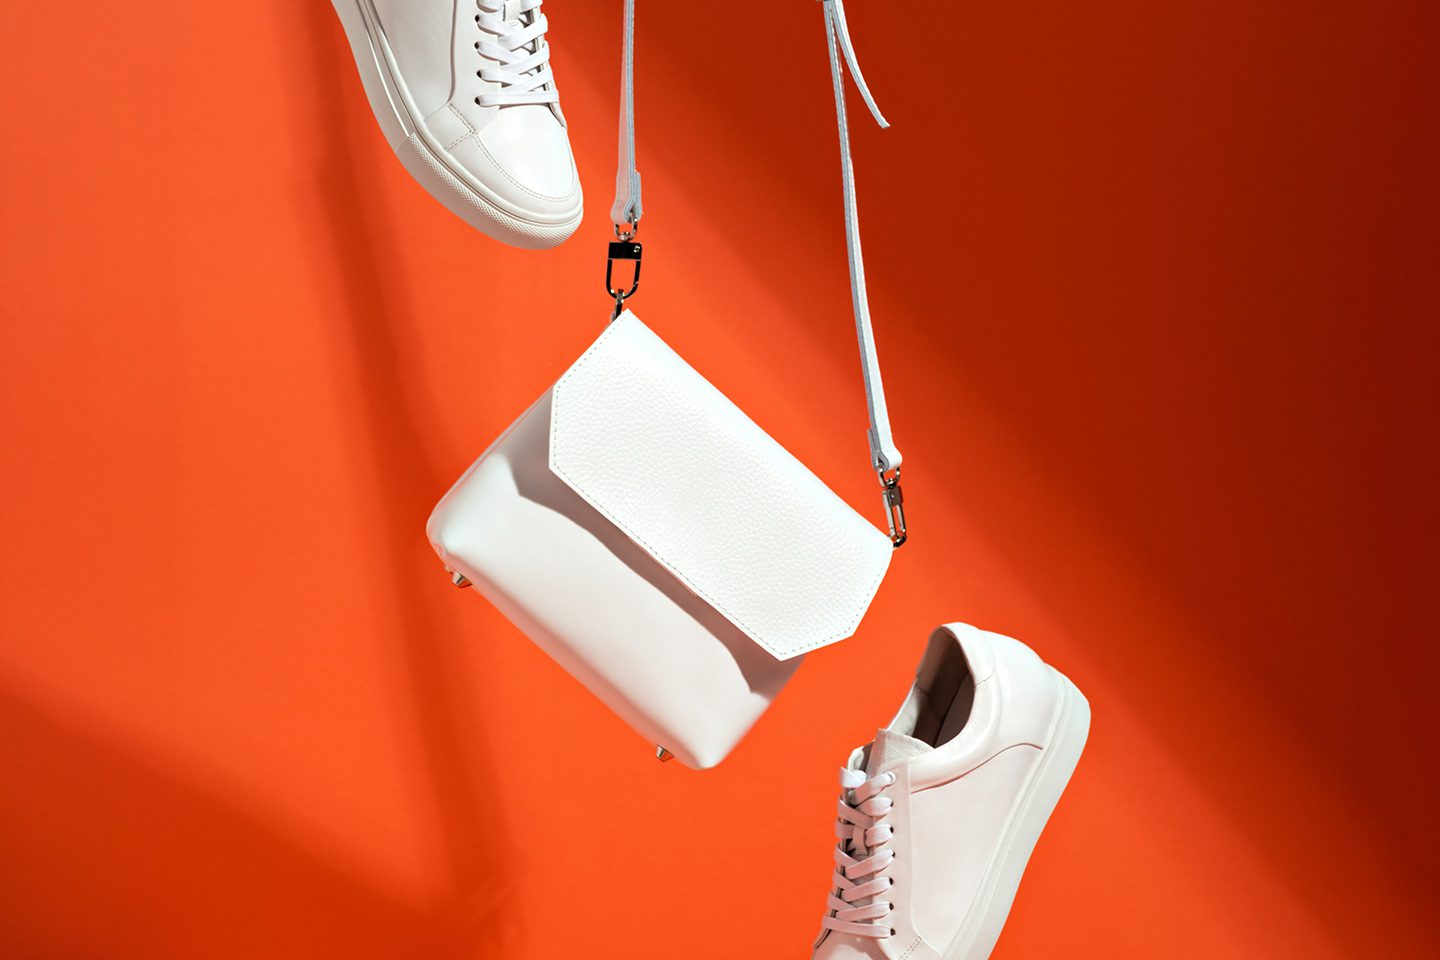 Leather shoes and purse on an orange background